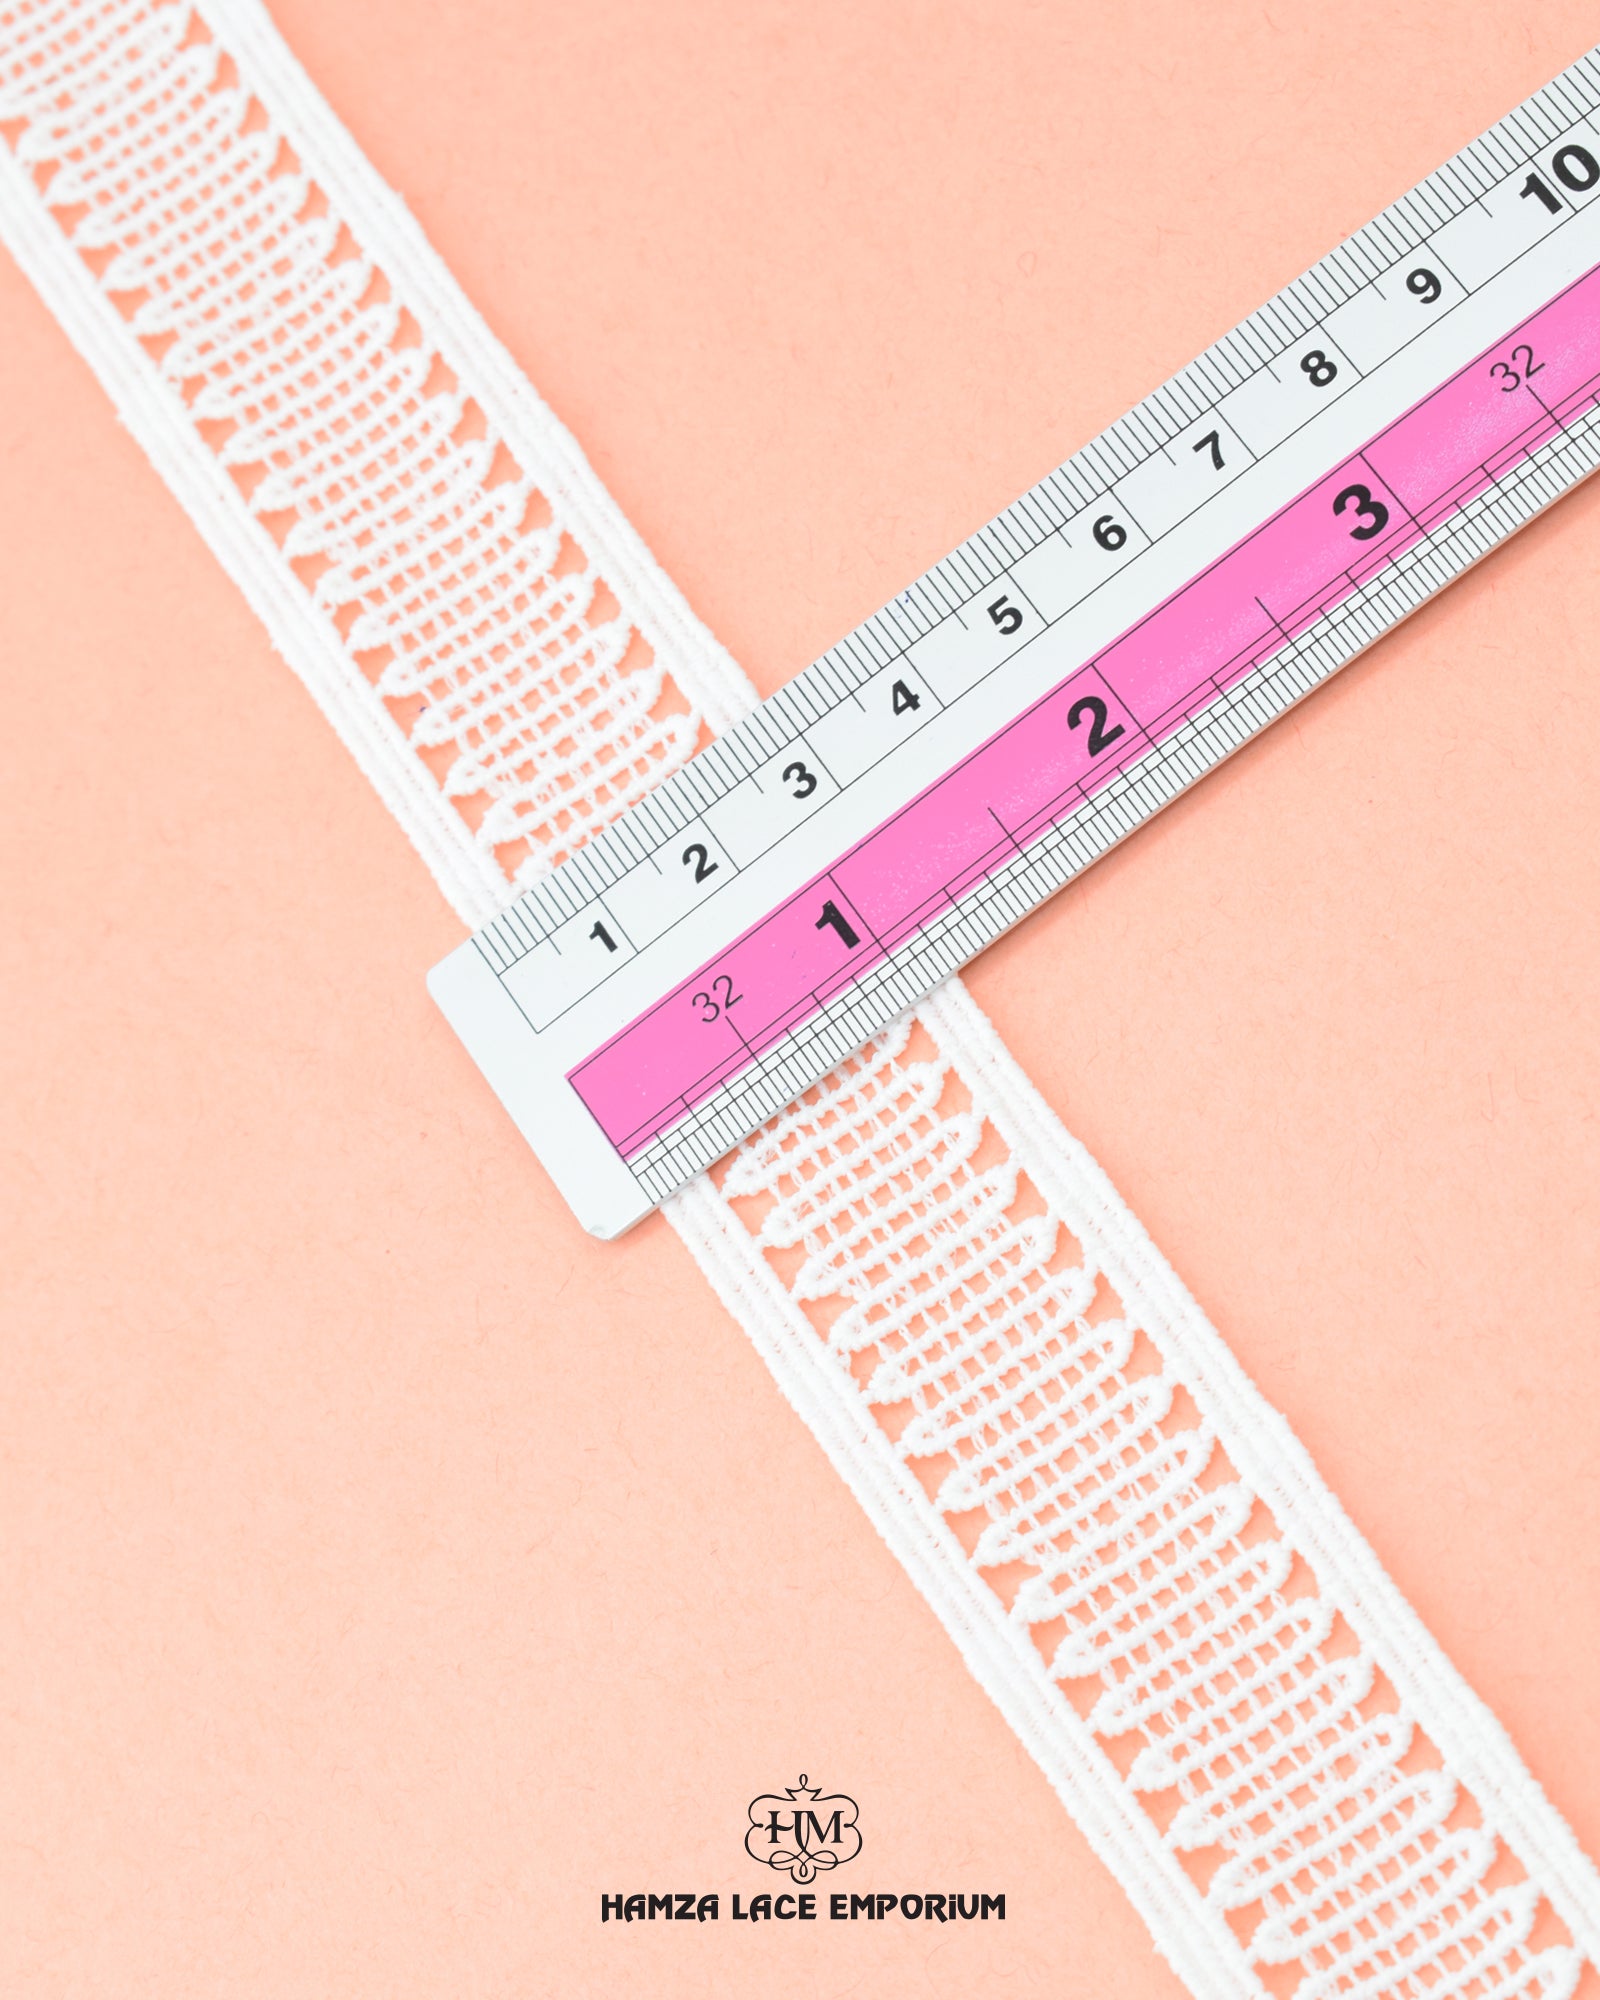 Size of the 'Center Filling Lace 334' is shown as '1.25' inches with the help of a ruler